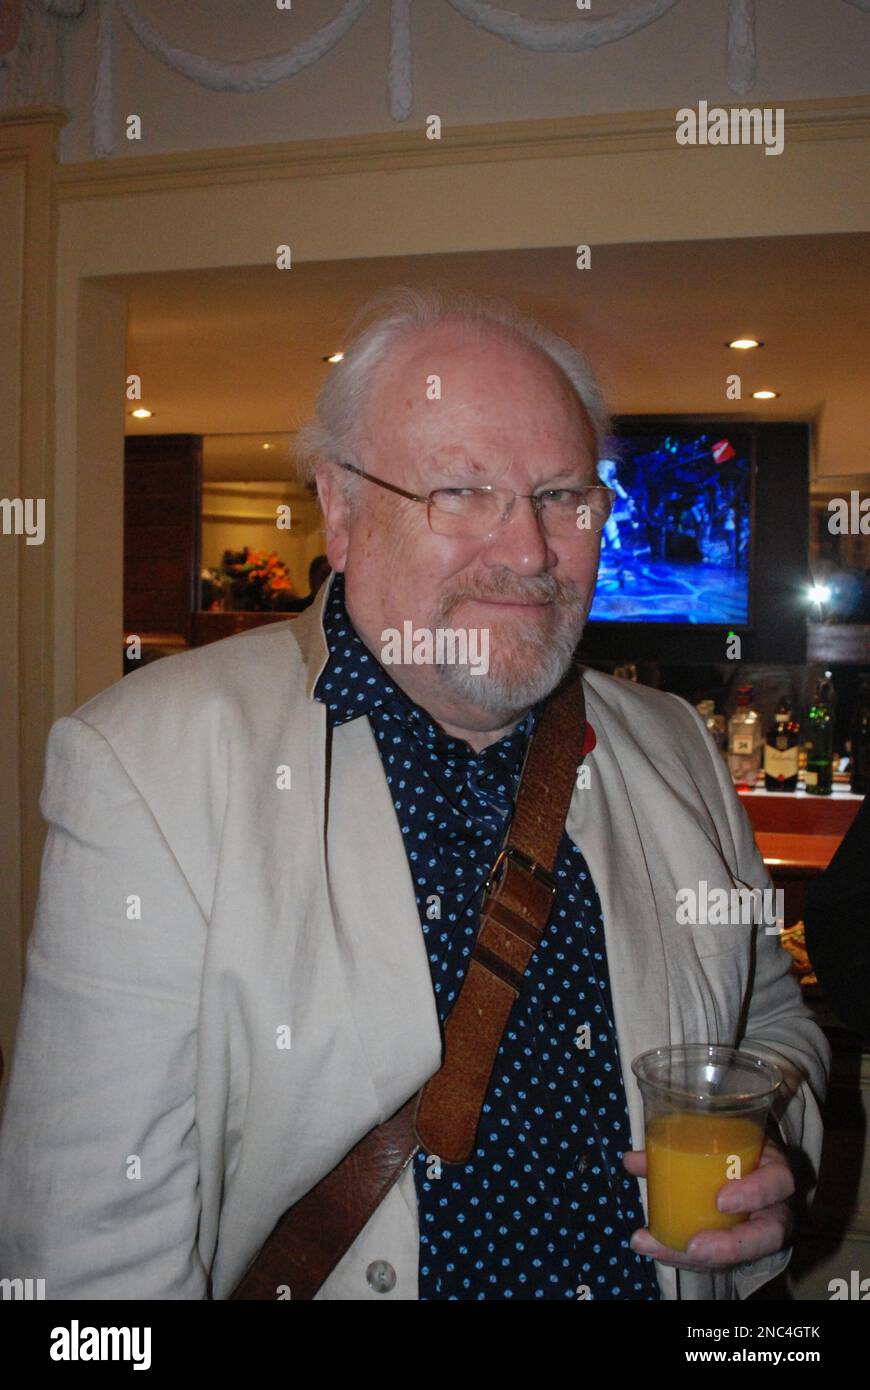 English actor Colin Baker, actor who played Paul Merroney in the BBC drama series The Brothers, and the sixth incarnation of the Doctor in Doctor Who. Stock Photo